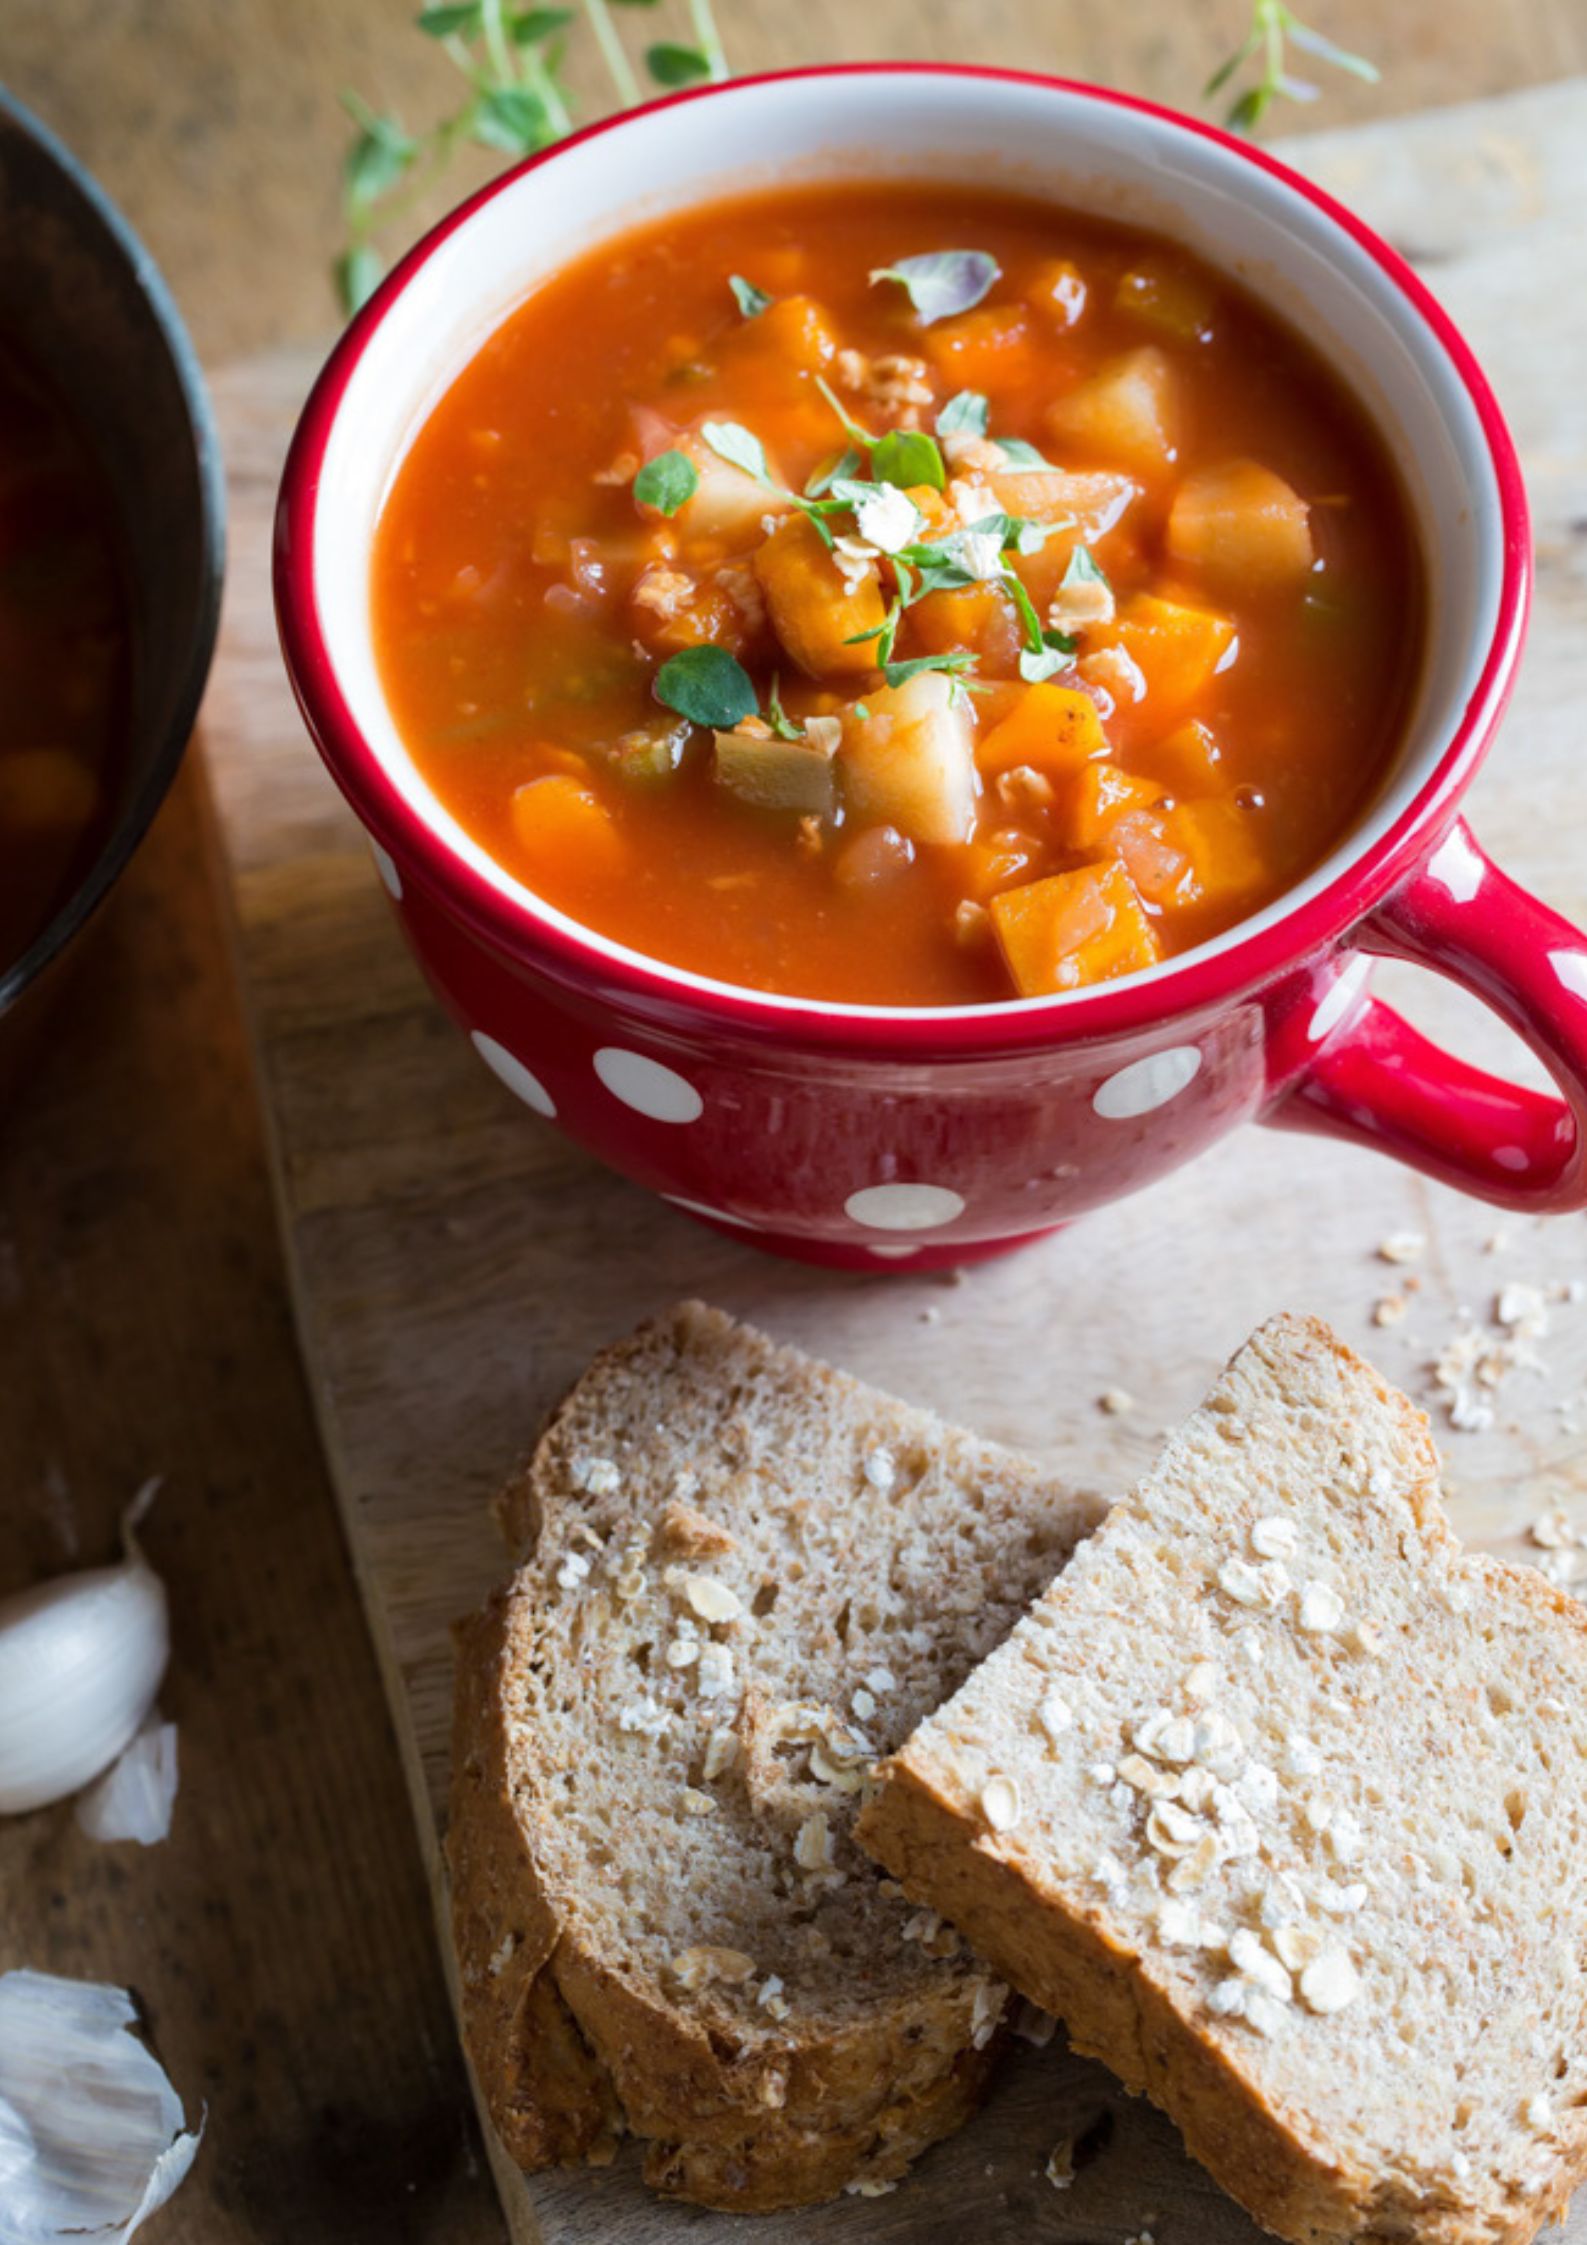 Made with store cupboard staples and vegetable leftovers this hearty chunky vegetable soup is a warming, easy meal with a delicious combination of flavours. Recipe on thecookandhim.com | #vegetablesoup #veggiesoup #vegansoup #chunkysoup #autumnrecipes #winterrecipes